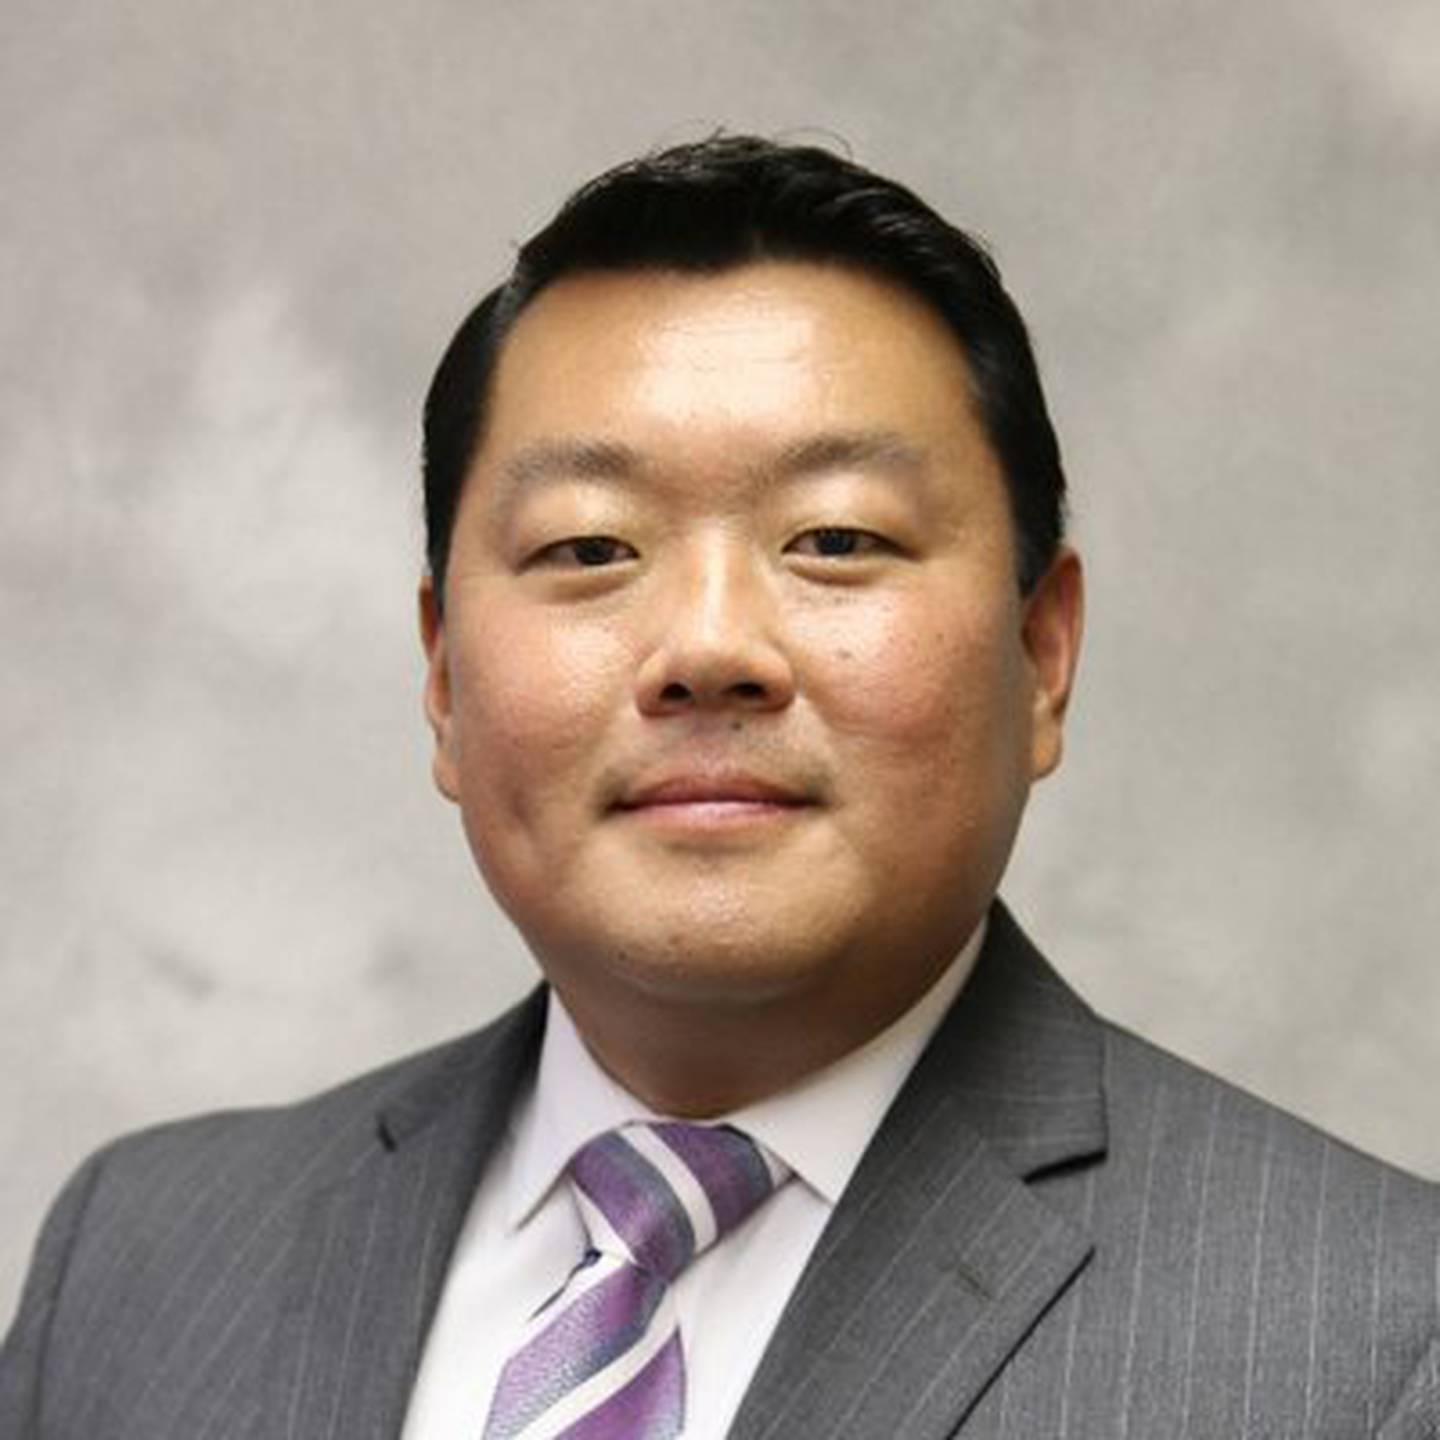 Tom Kim will become Batavia School District's new superintendent in July.
Kim will succeed Superintendent Lisa Hichens, who will retire at the end of the 2022-2023 school year.